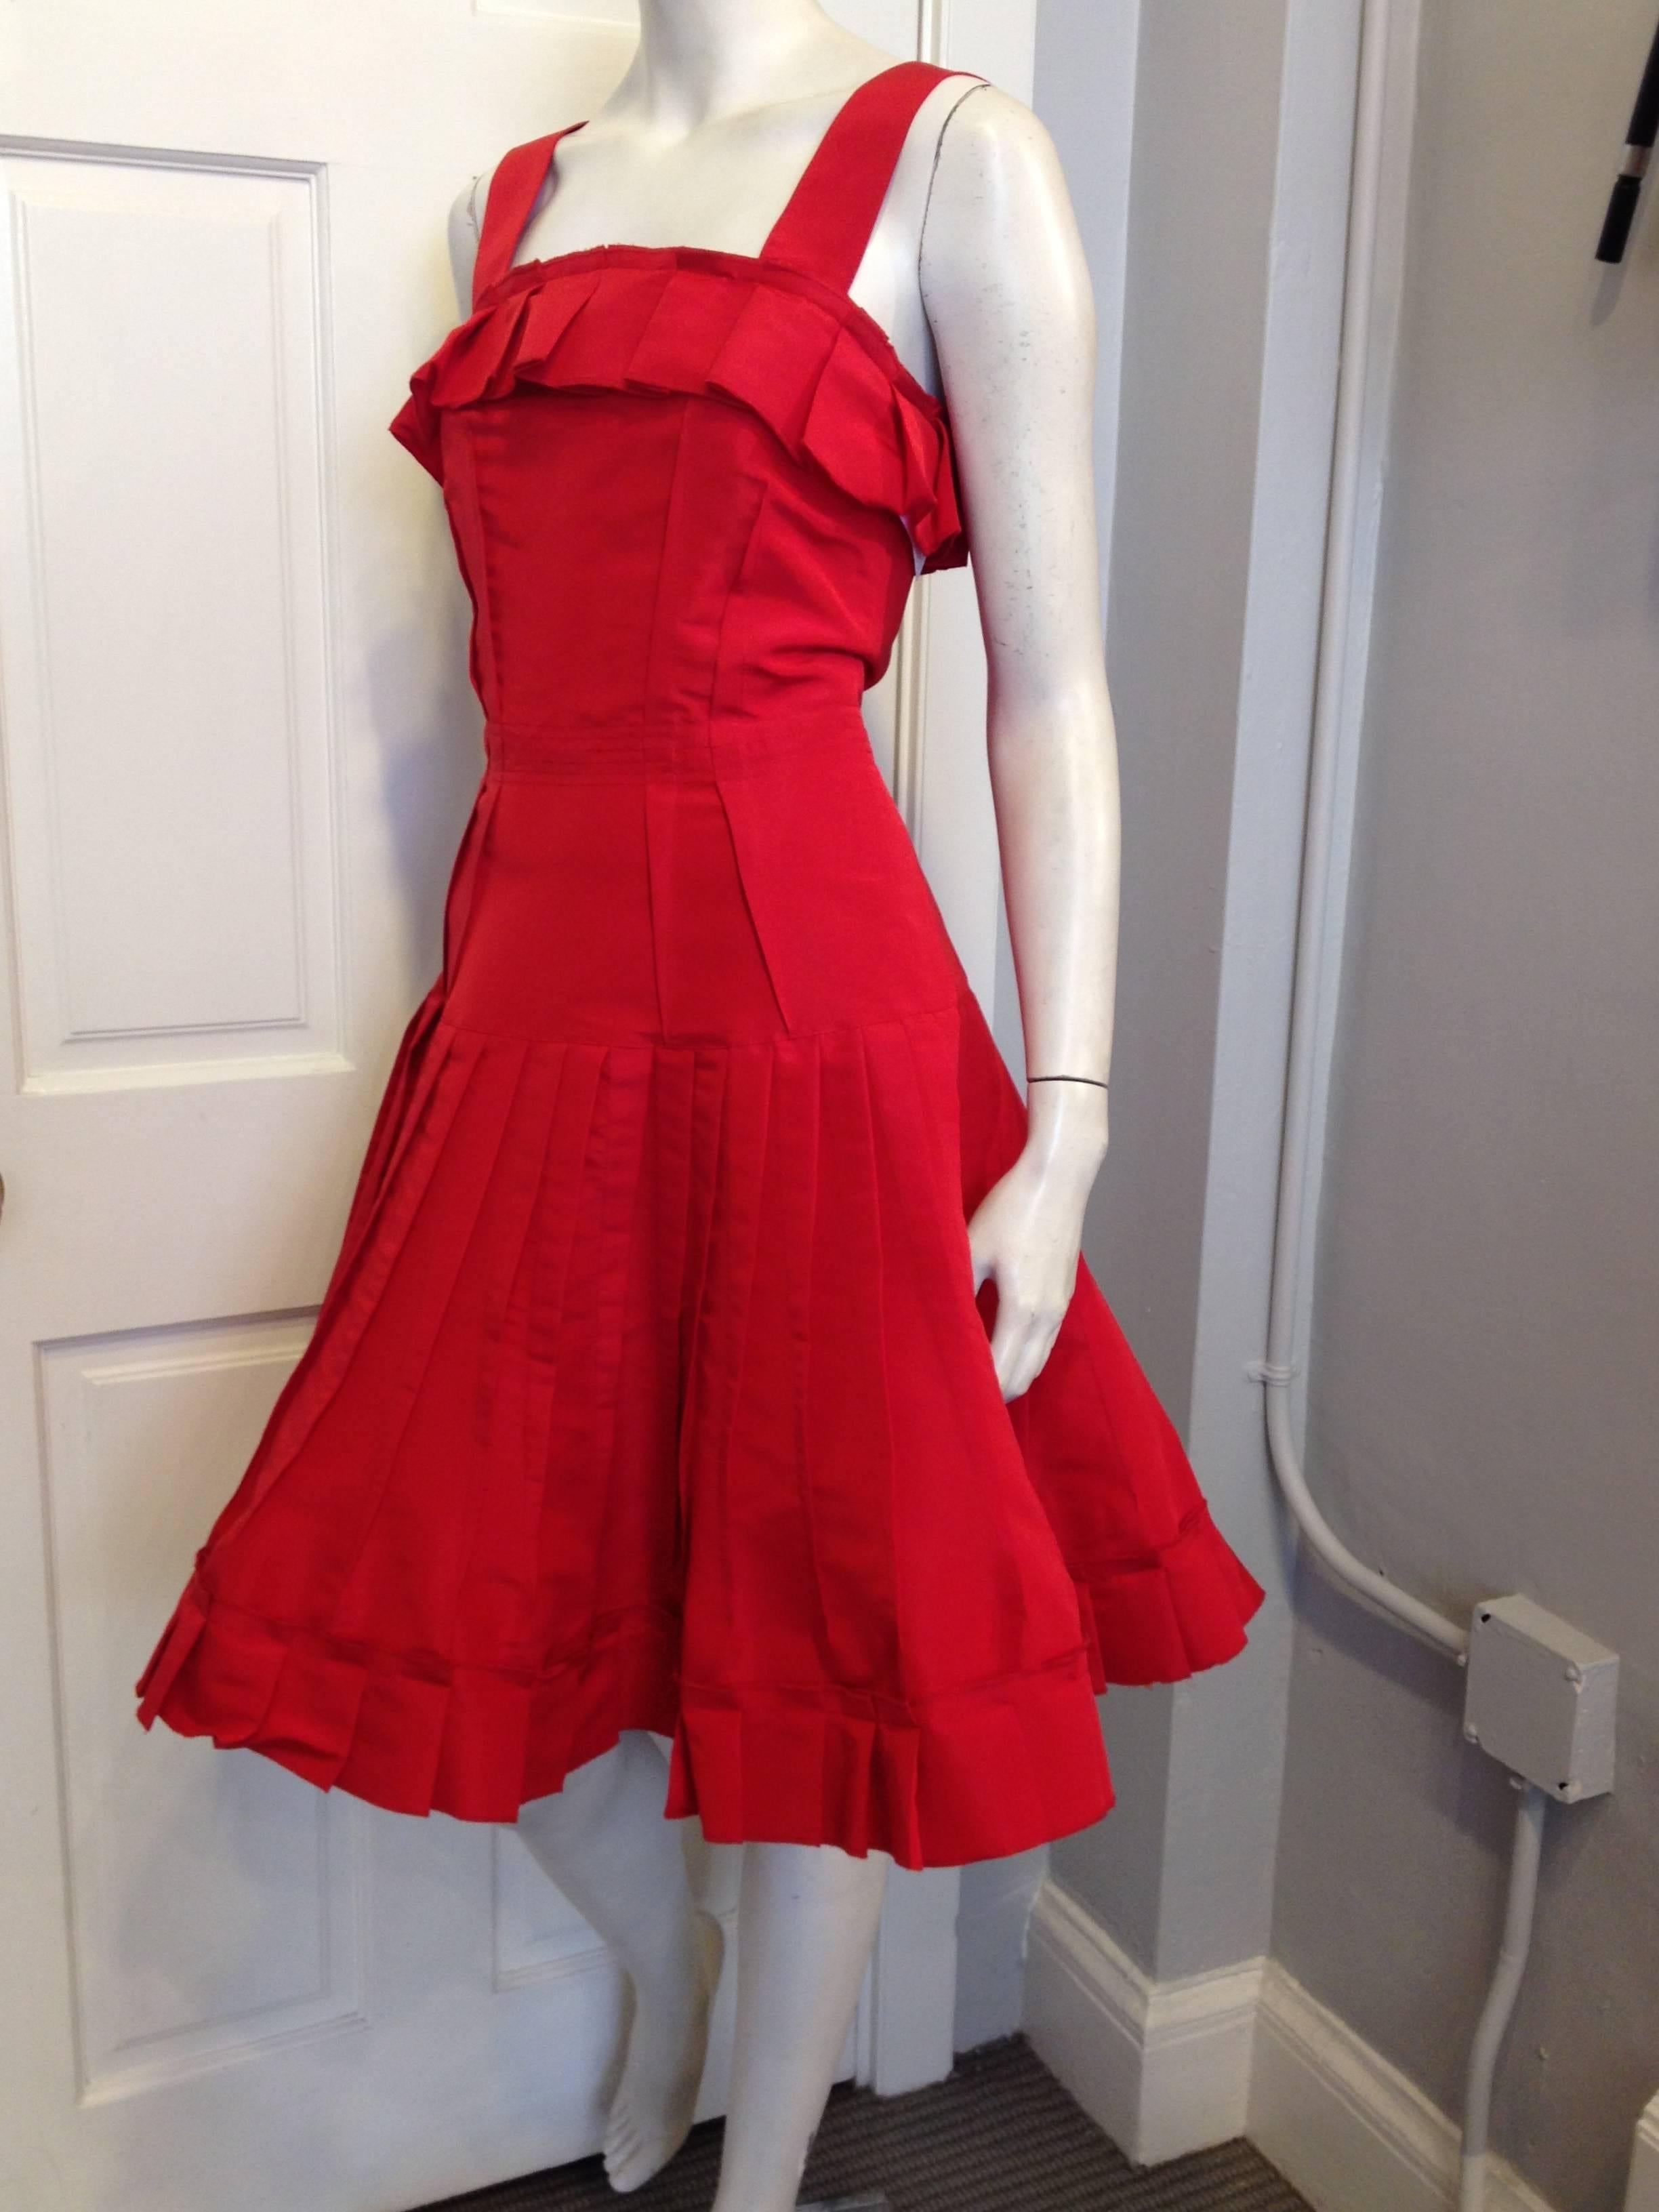 There's nothing more iconic than a cherry red dress, and Oscar de la Renta made ones of the best. This piece is fun but elegant, lively but timeless - the wide shoulder straps are offset by the big box-pleated ruffle lining the bust, which is